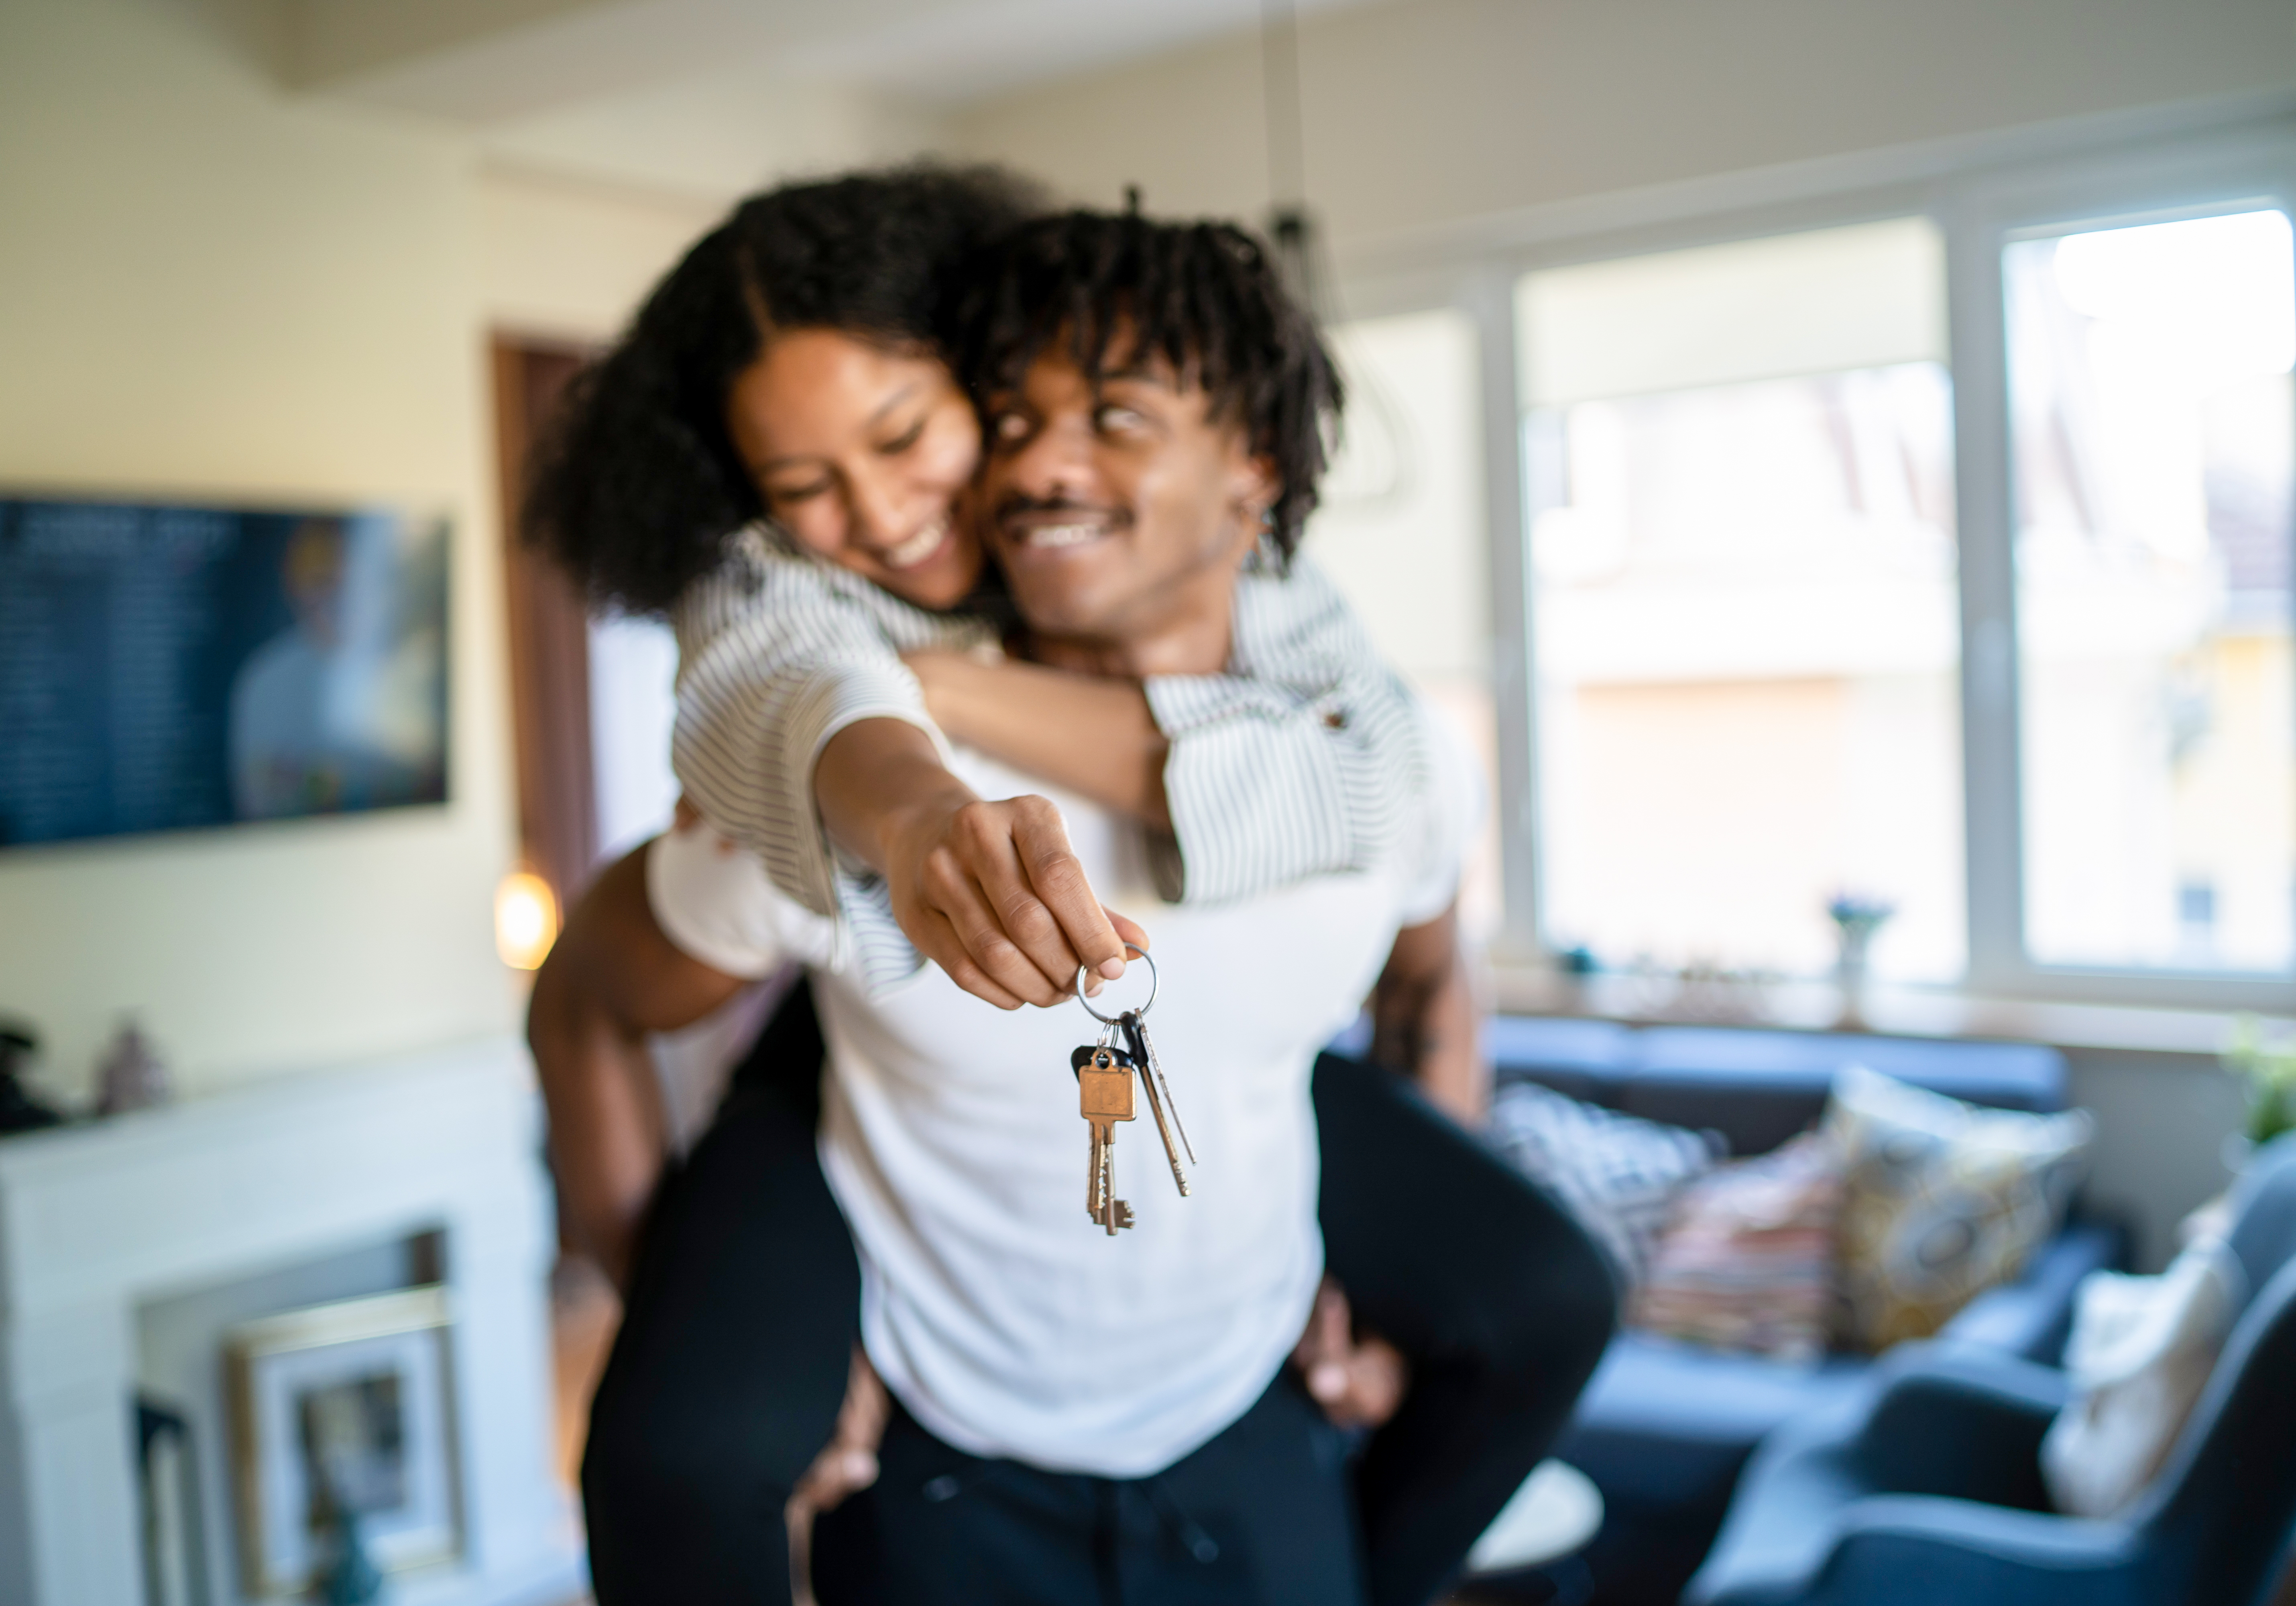 Woman On Man's Back Smiling and Holding Keys To New Home